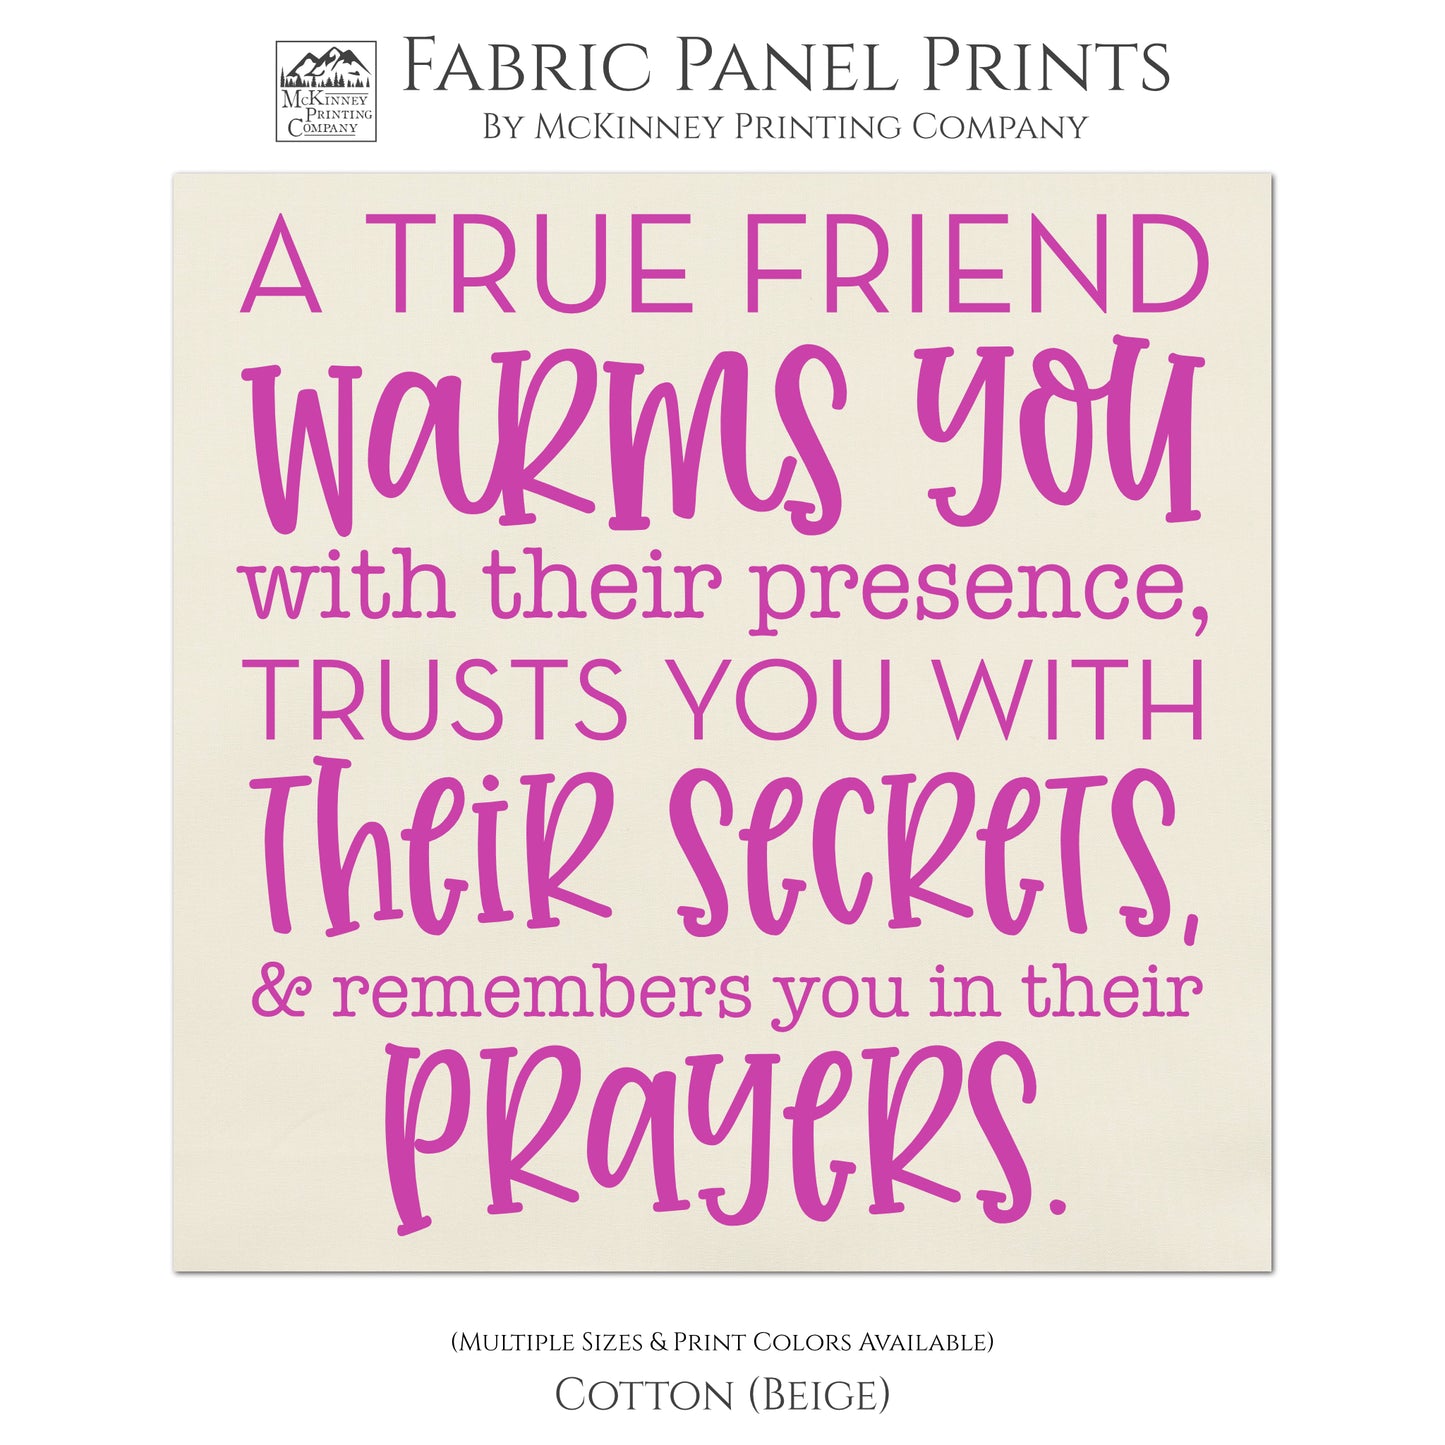 A true friend warms you with their presence, trusts you with their secrets, and remembers you in their prayers - Friendship fabric, Quilt, Craft, Wall Art - Cotton